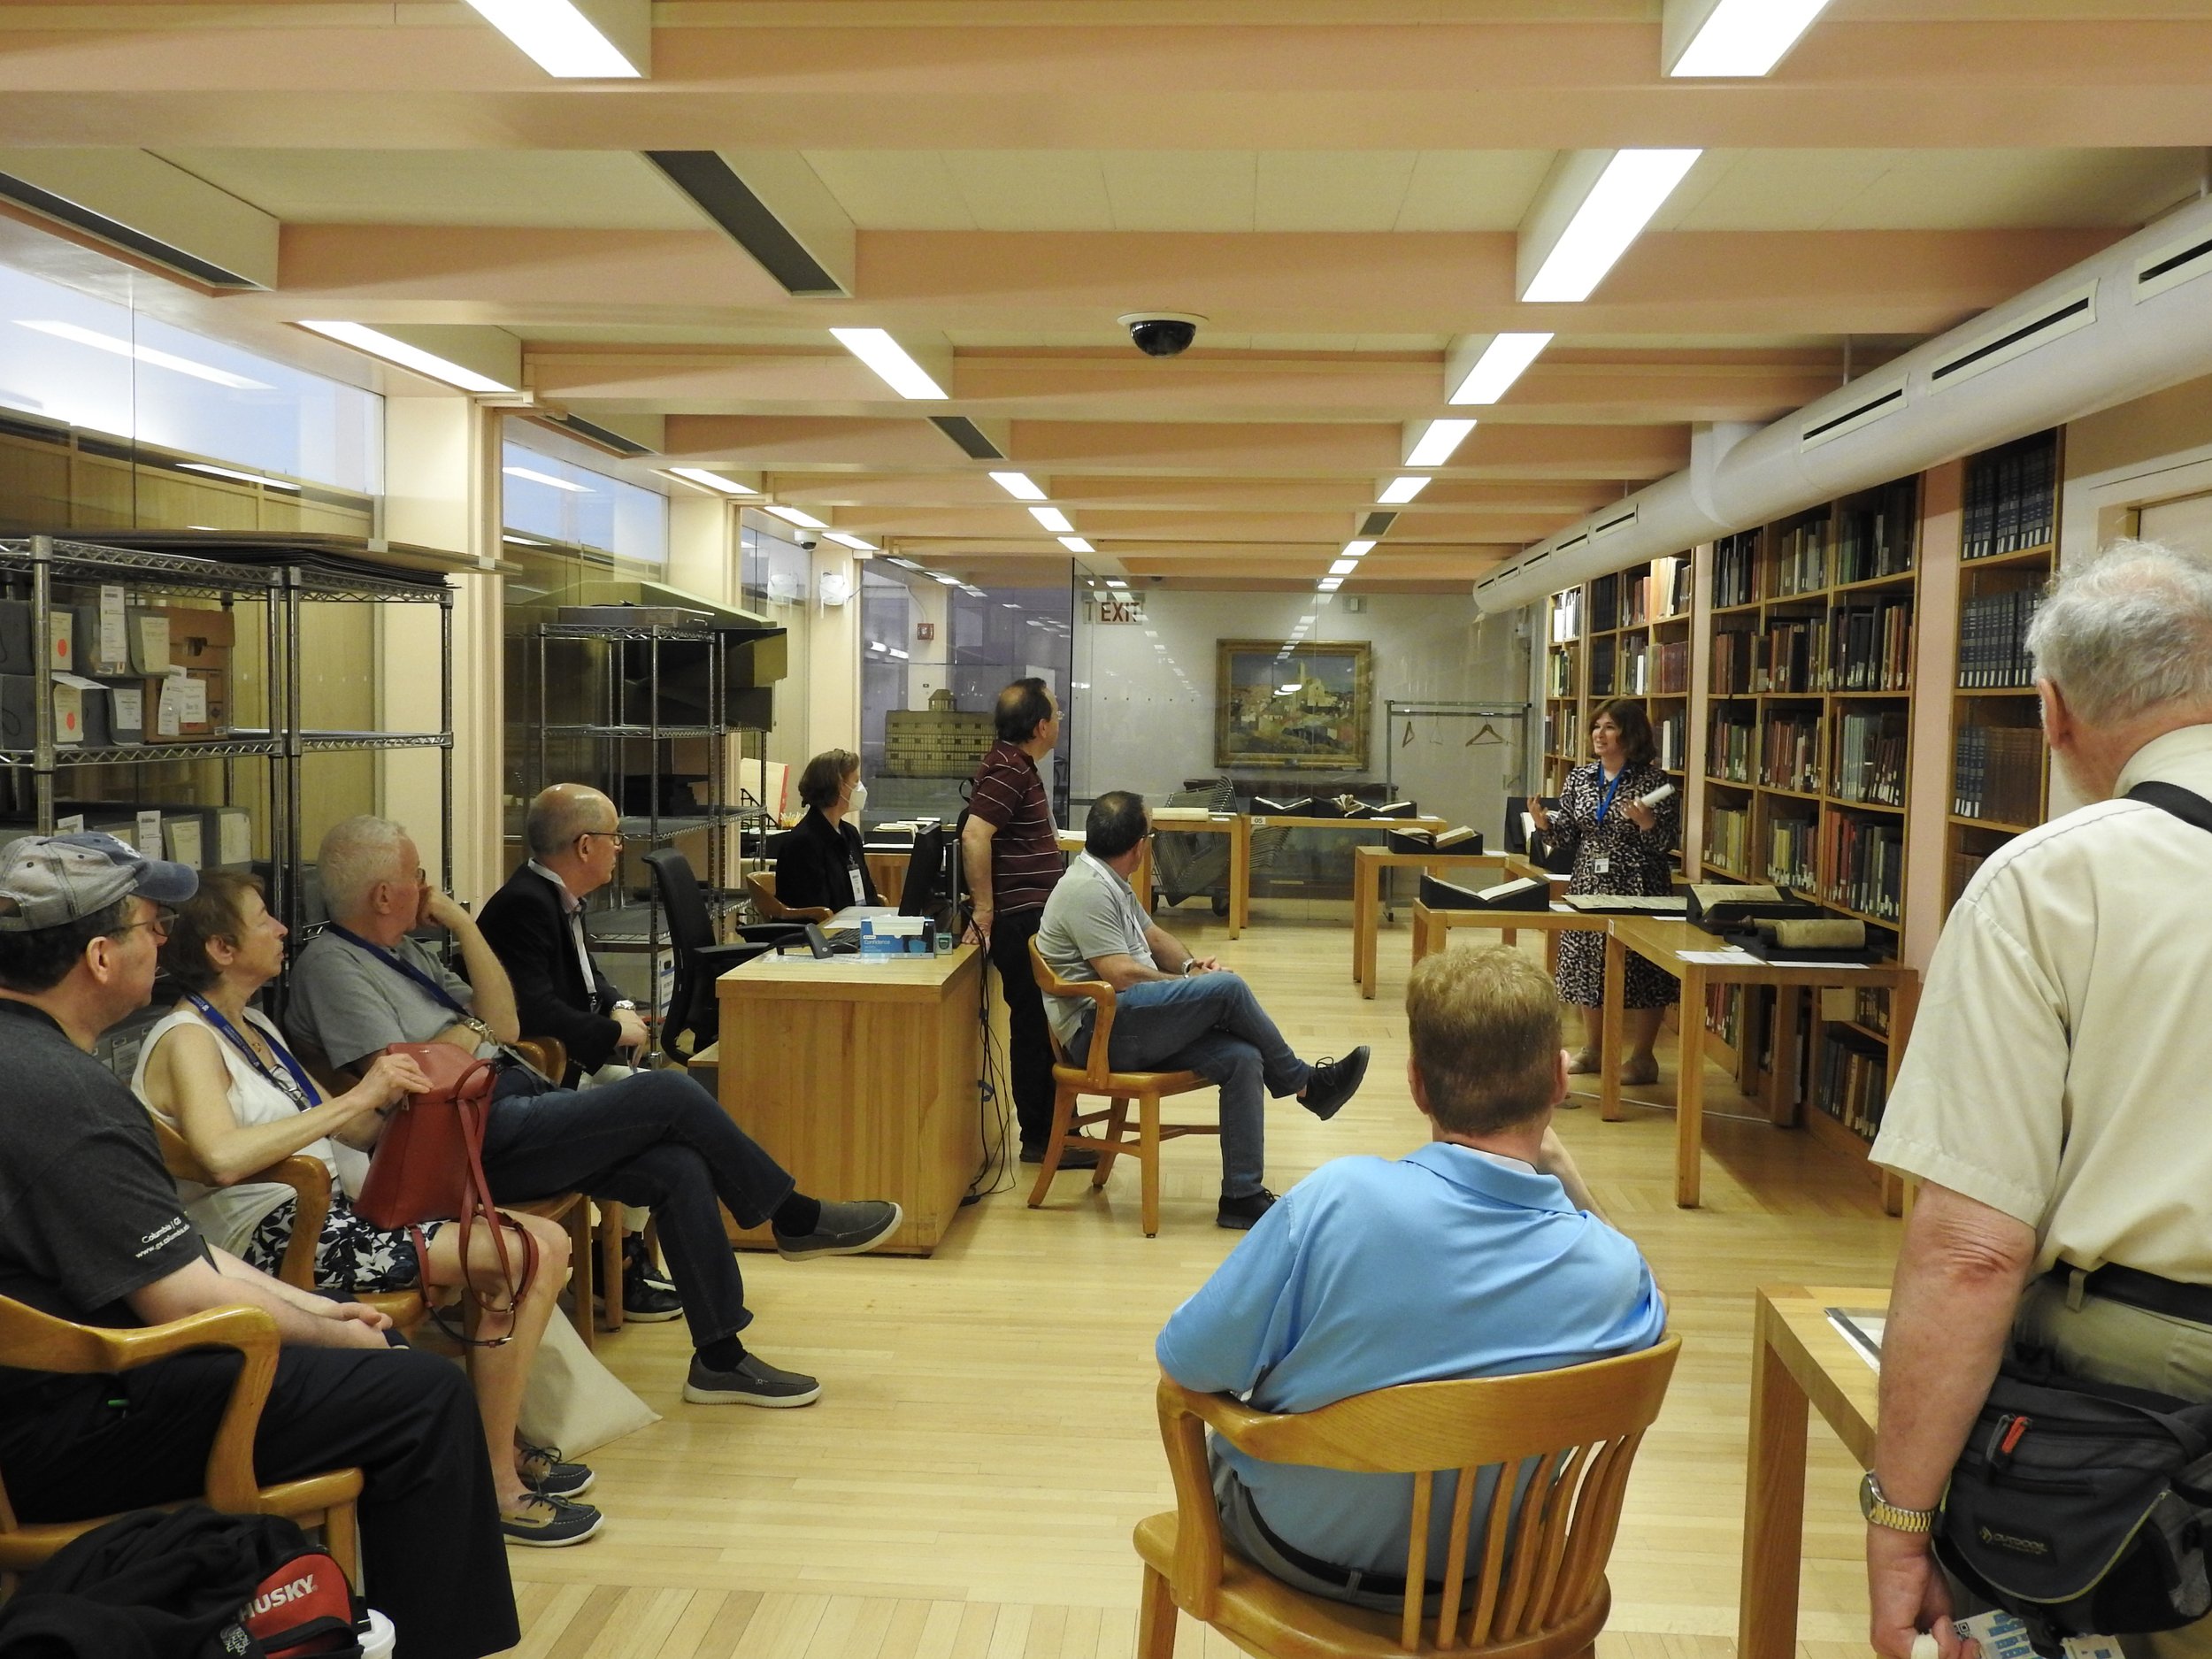  Dr. Margolis shares details about the collection of manuscripts on display. 